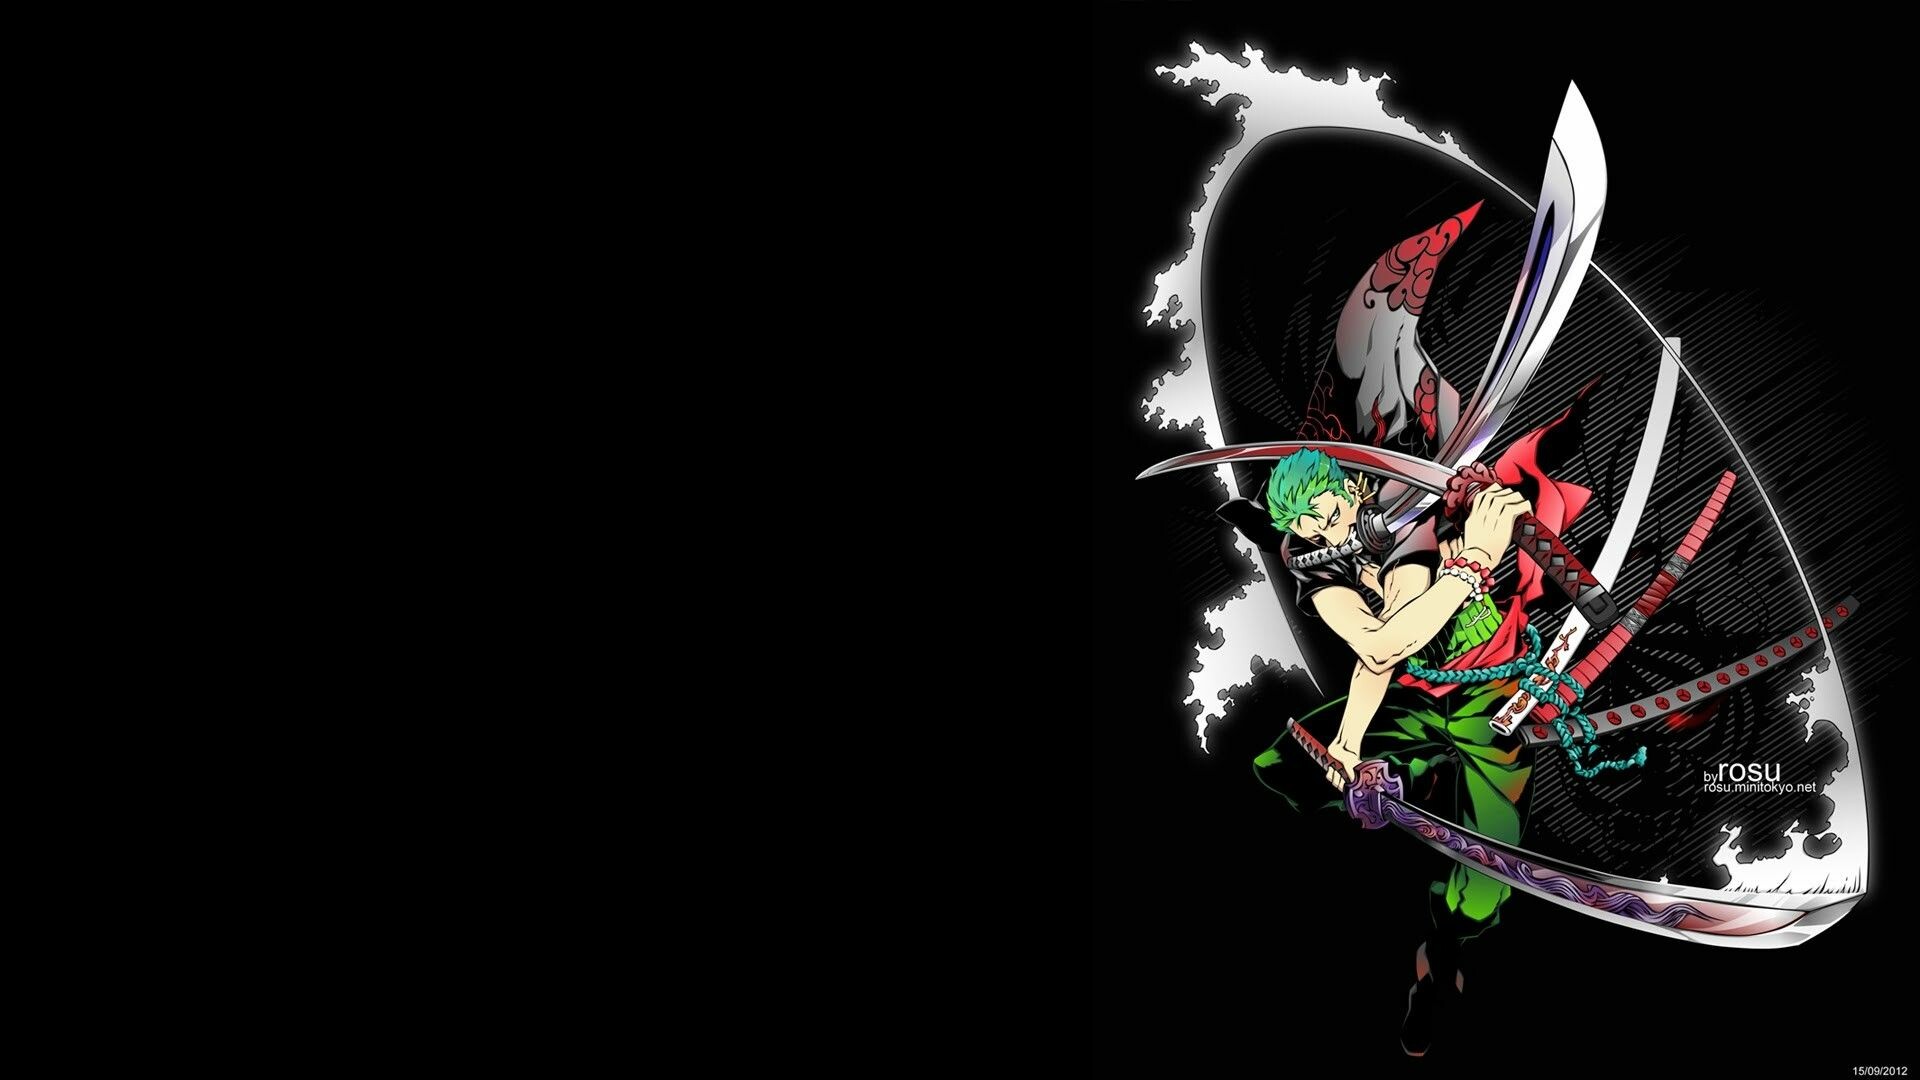 37 Zoro Hd Wallpapers Hd 4k 5k For Pc And Mobile Download Free Images For Iphone Android